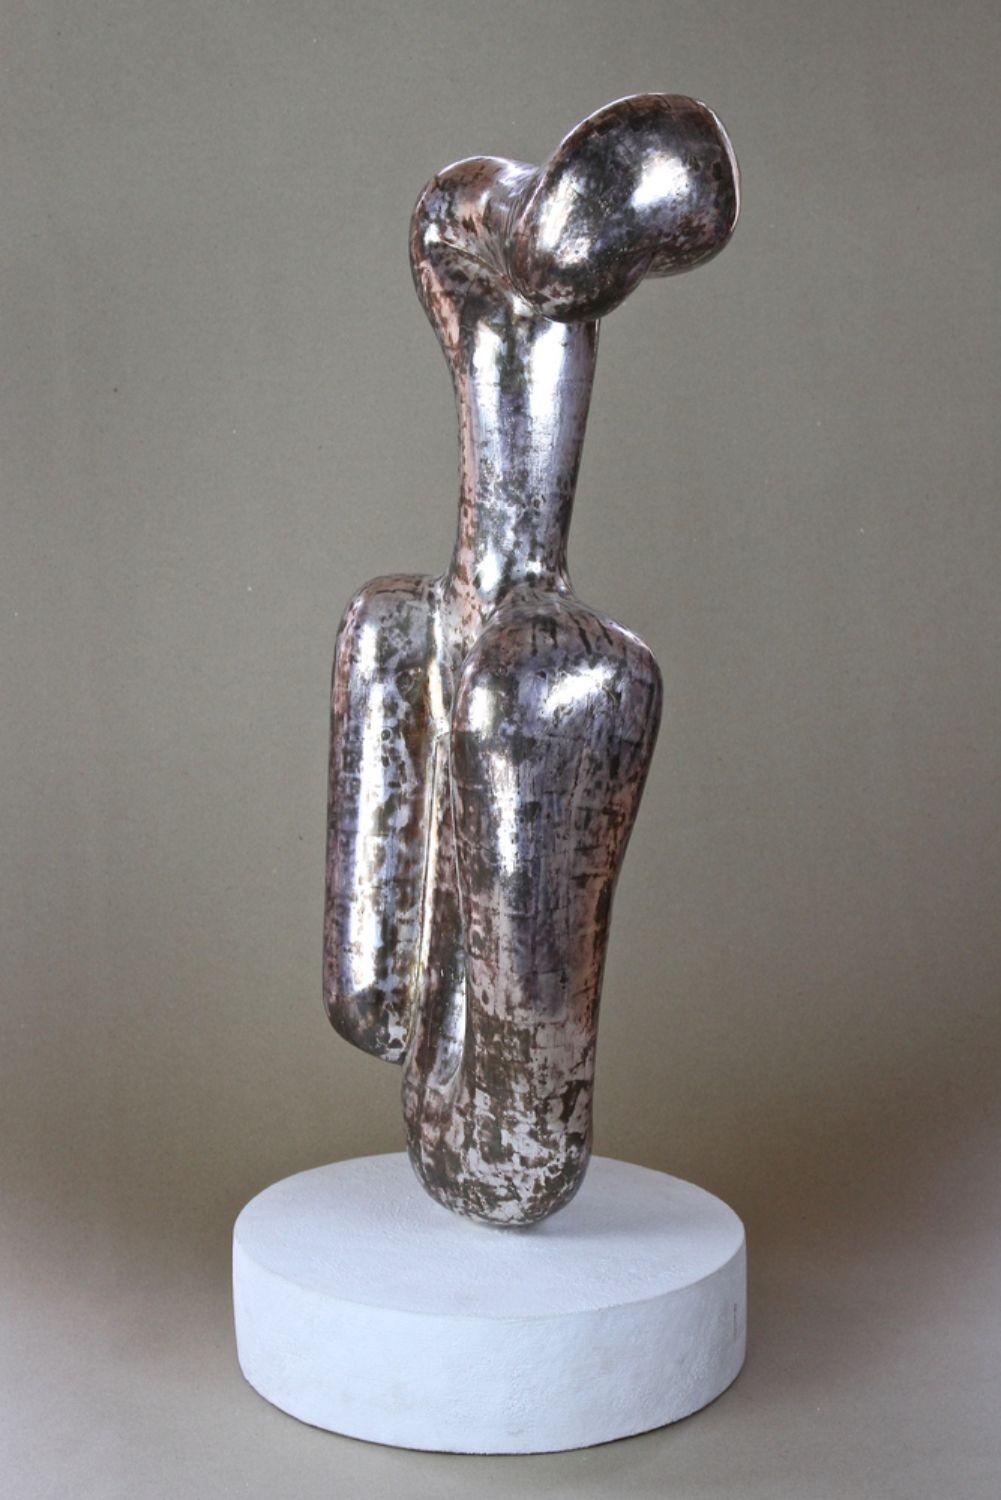 Abstract Contemporary Silvered Sculpture by M. Treml, Handcarved, Austria 2018 For Sale 13